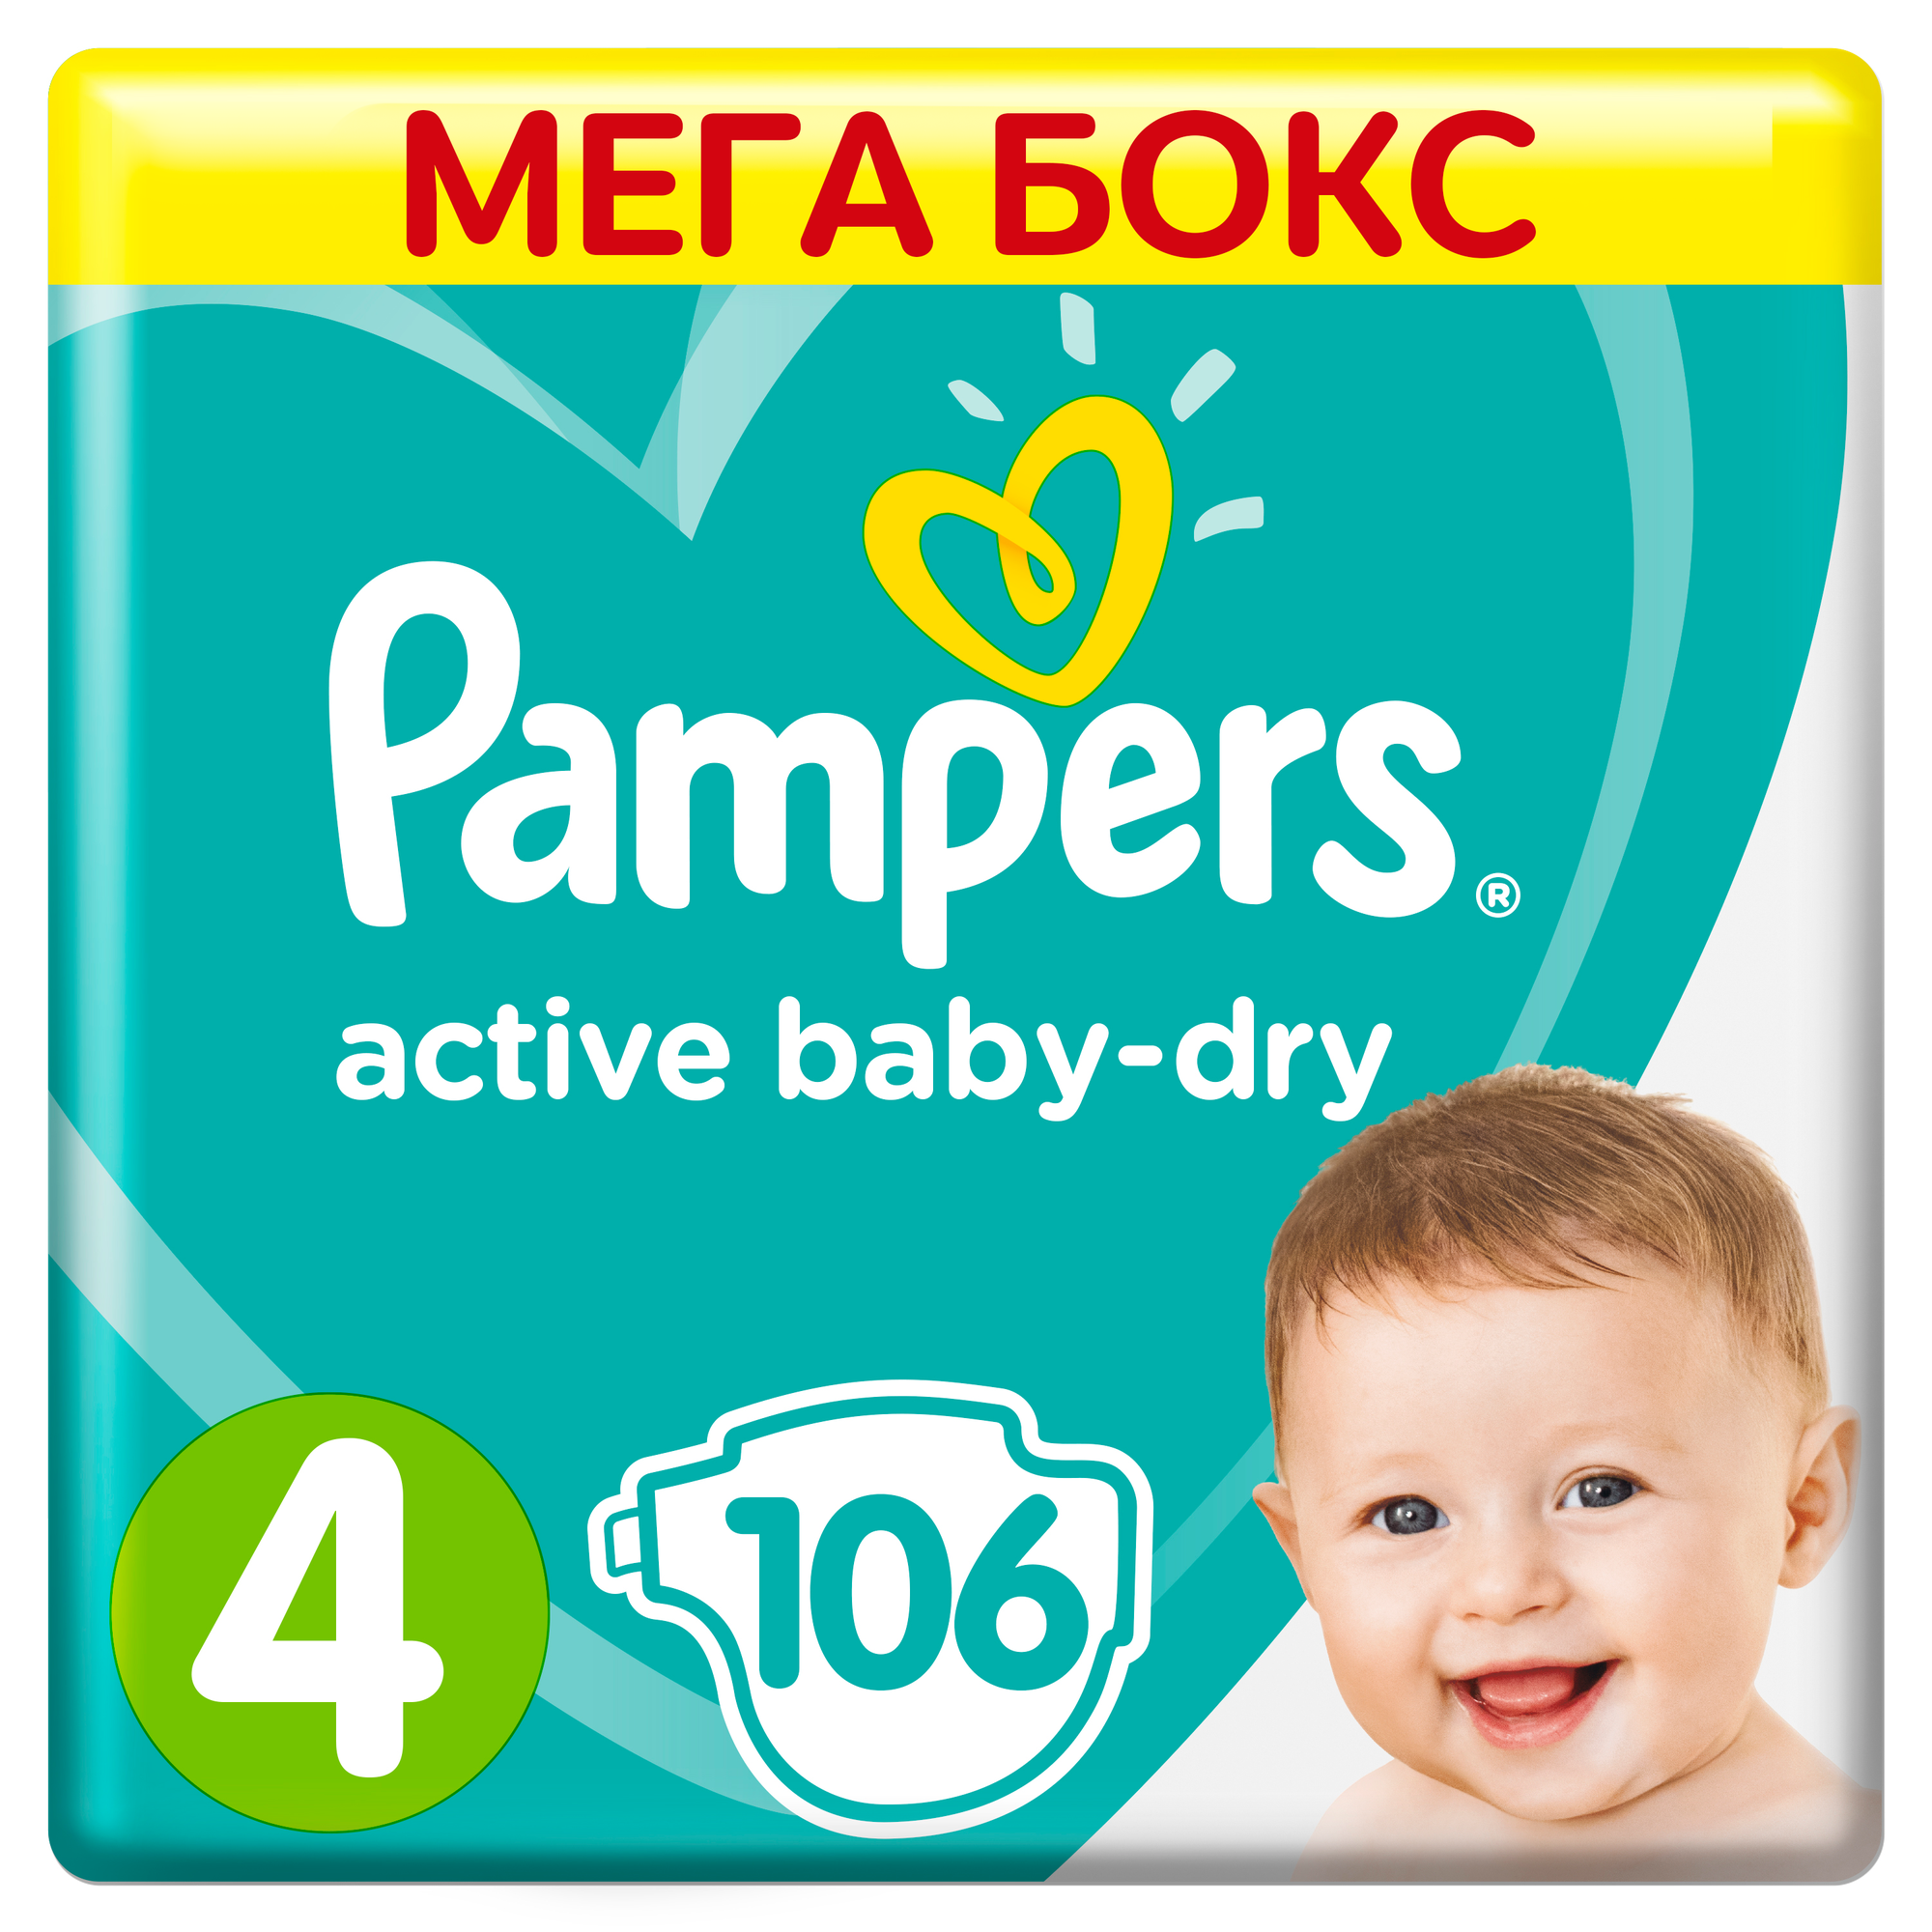  Pampers Active Baby-Dry 914 ,  4, 106 .